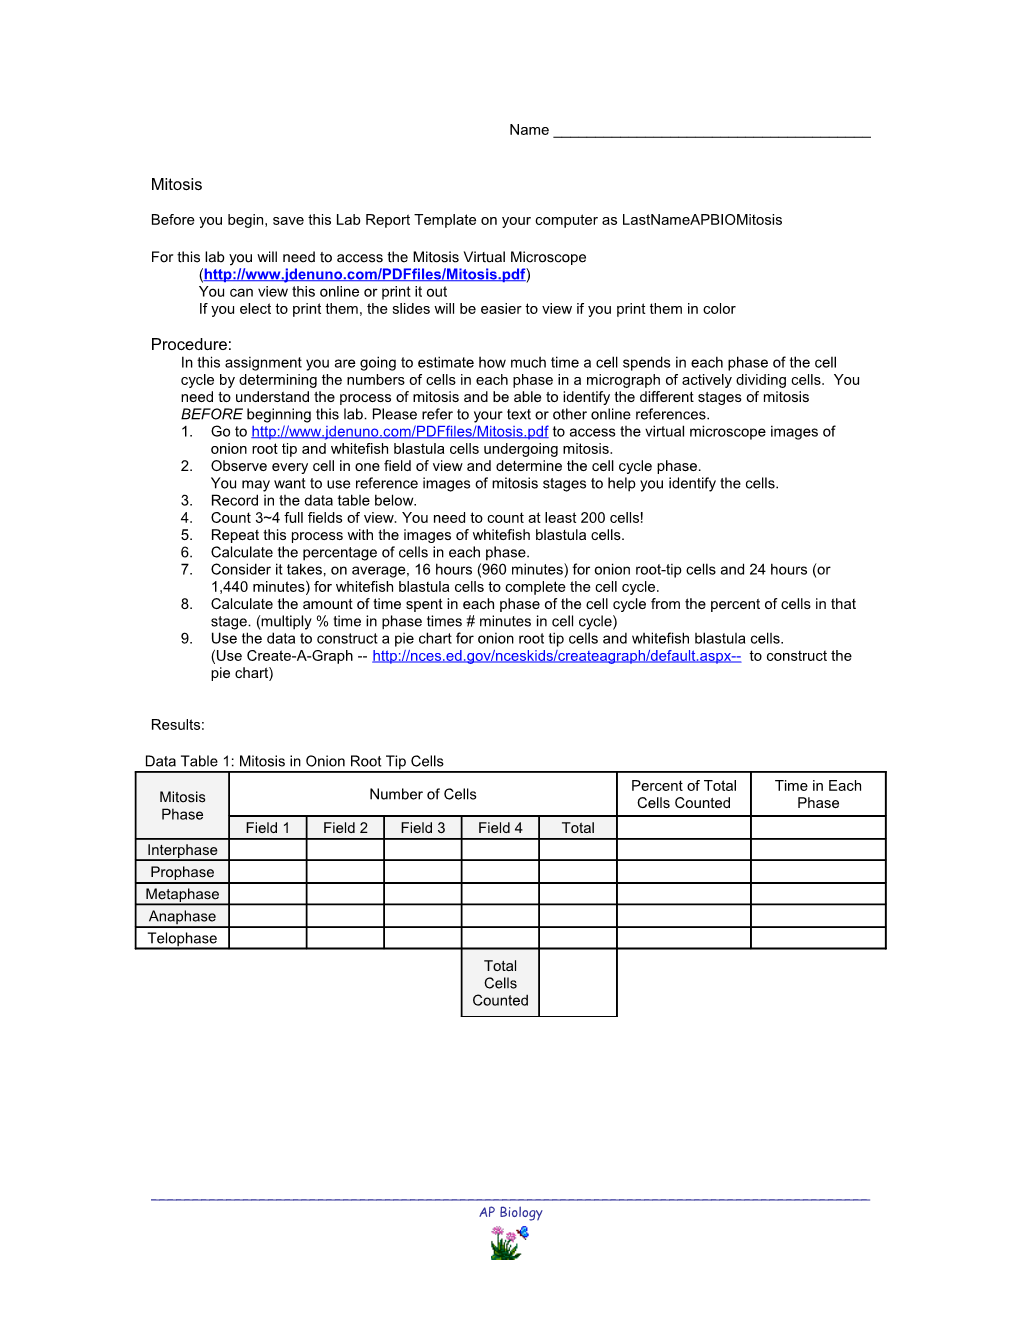 Before You Begin, Save This Lab Report Template on Your Computer As Lastnameapbiomitosis